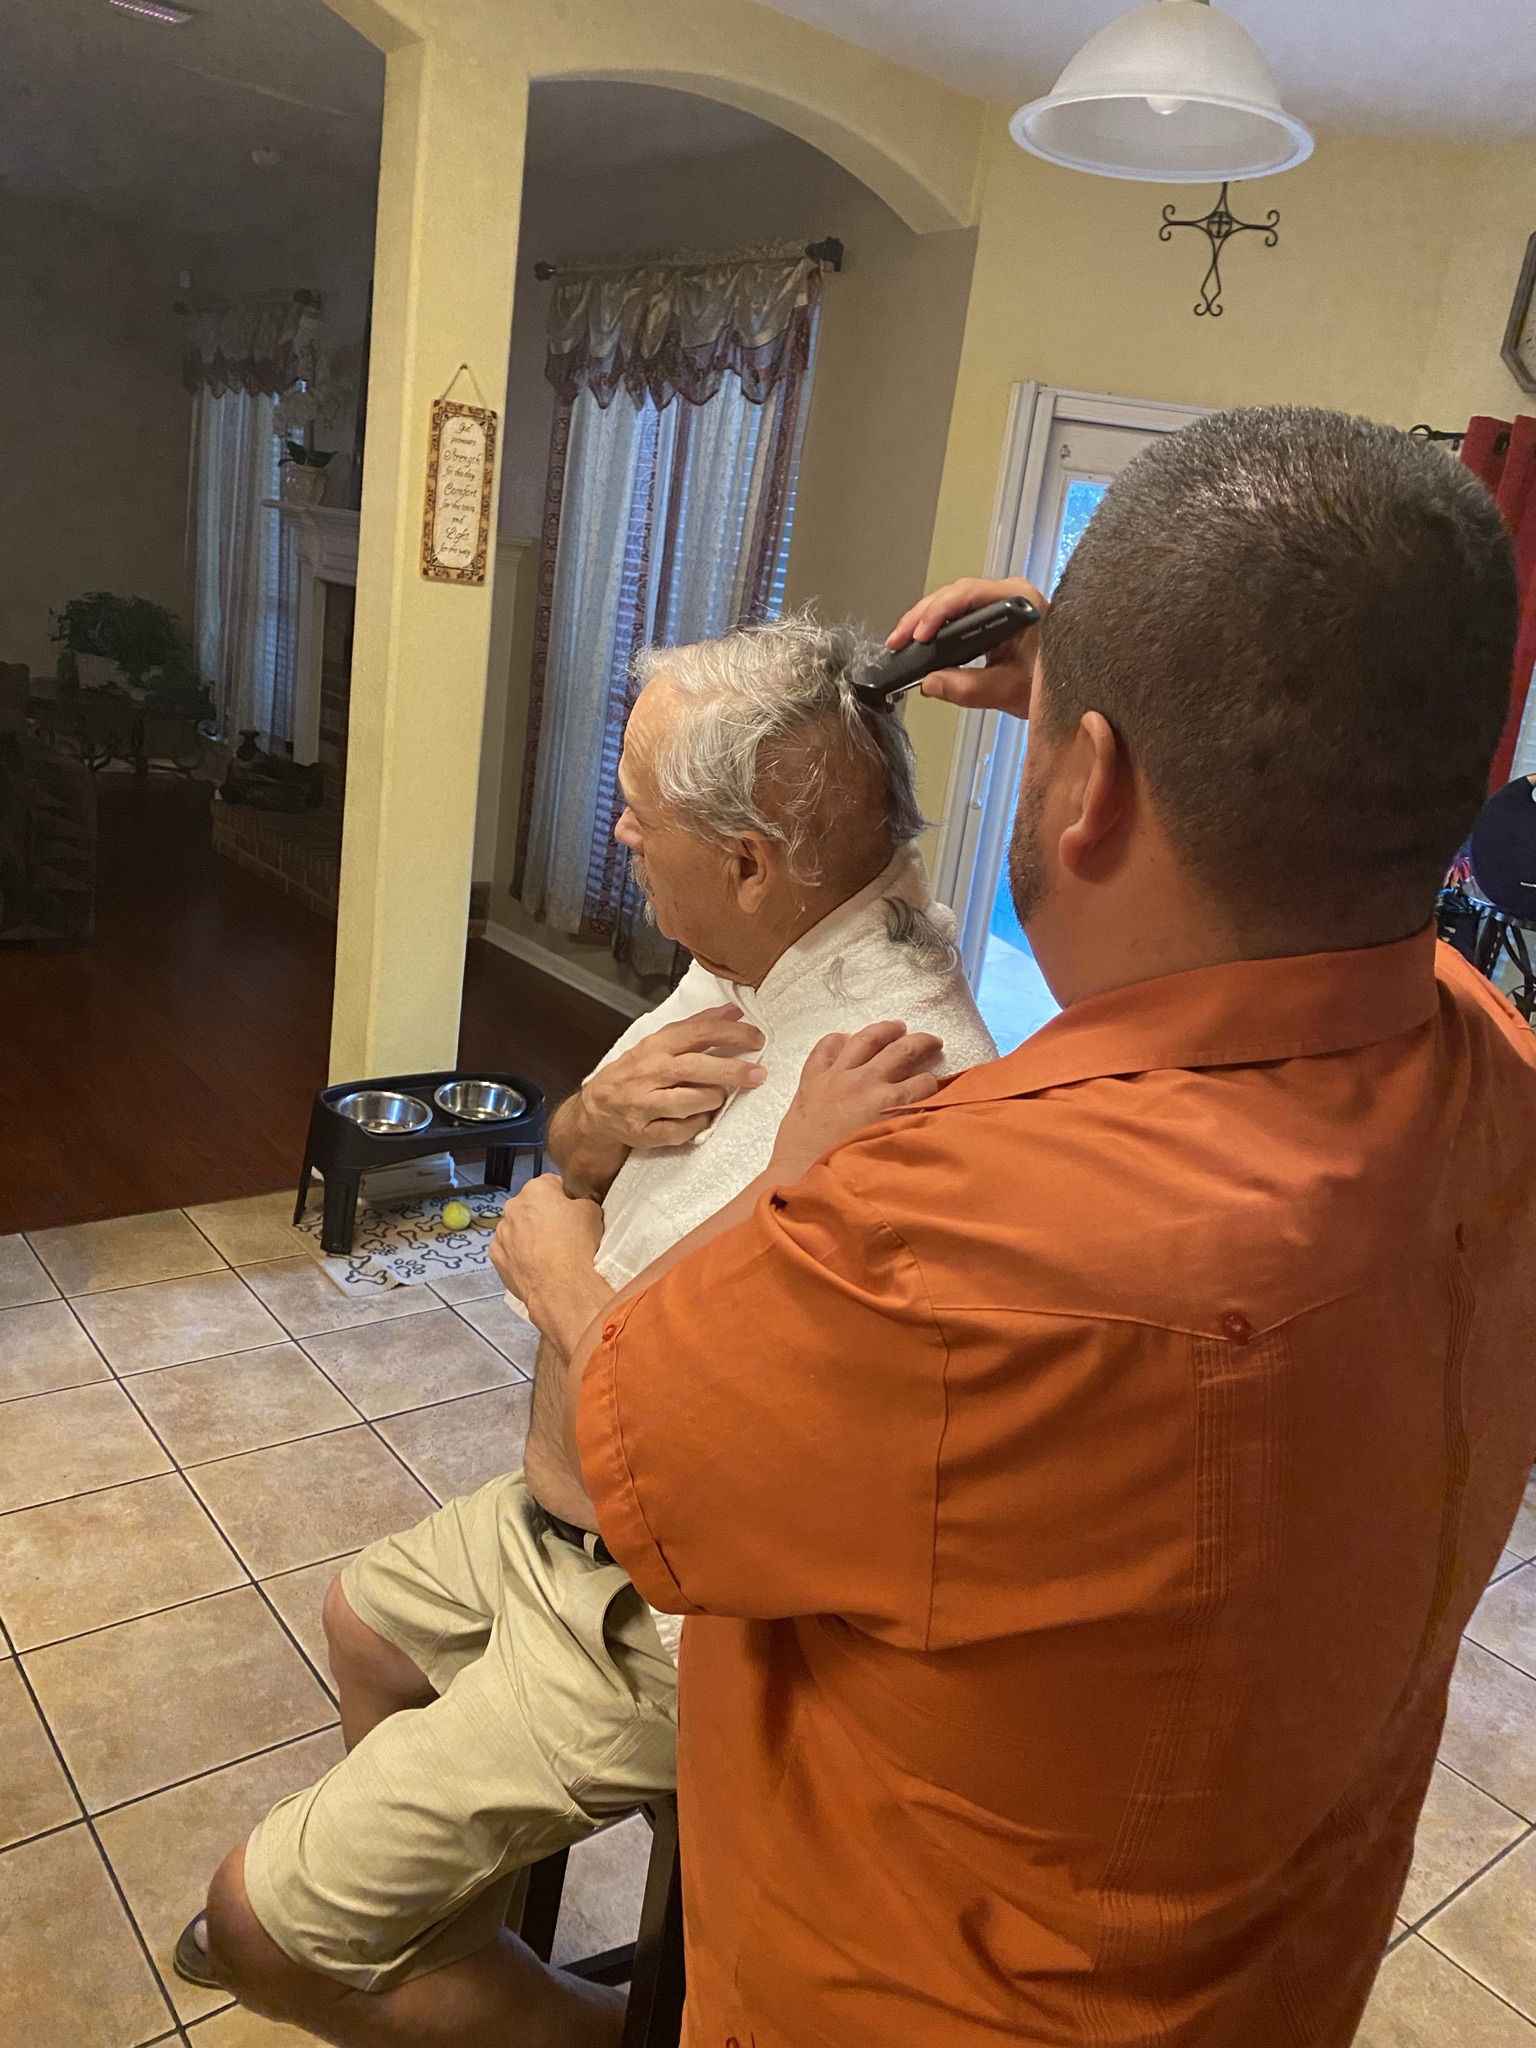 Willie Durazo, III shaves the hair of his father, Willie Durazo, Jr.